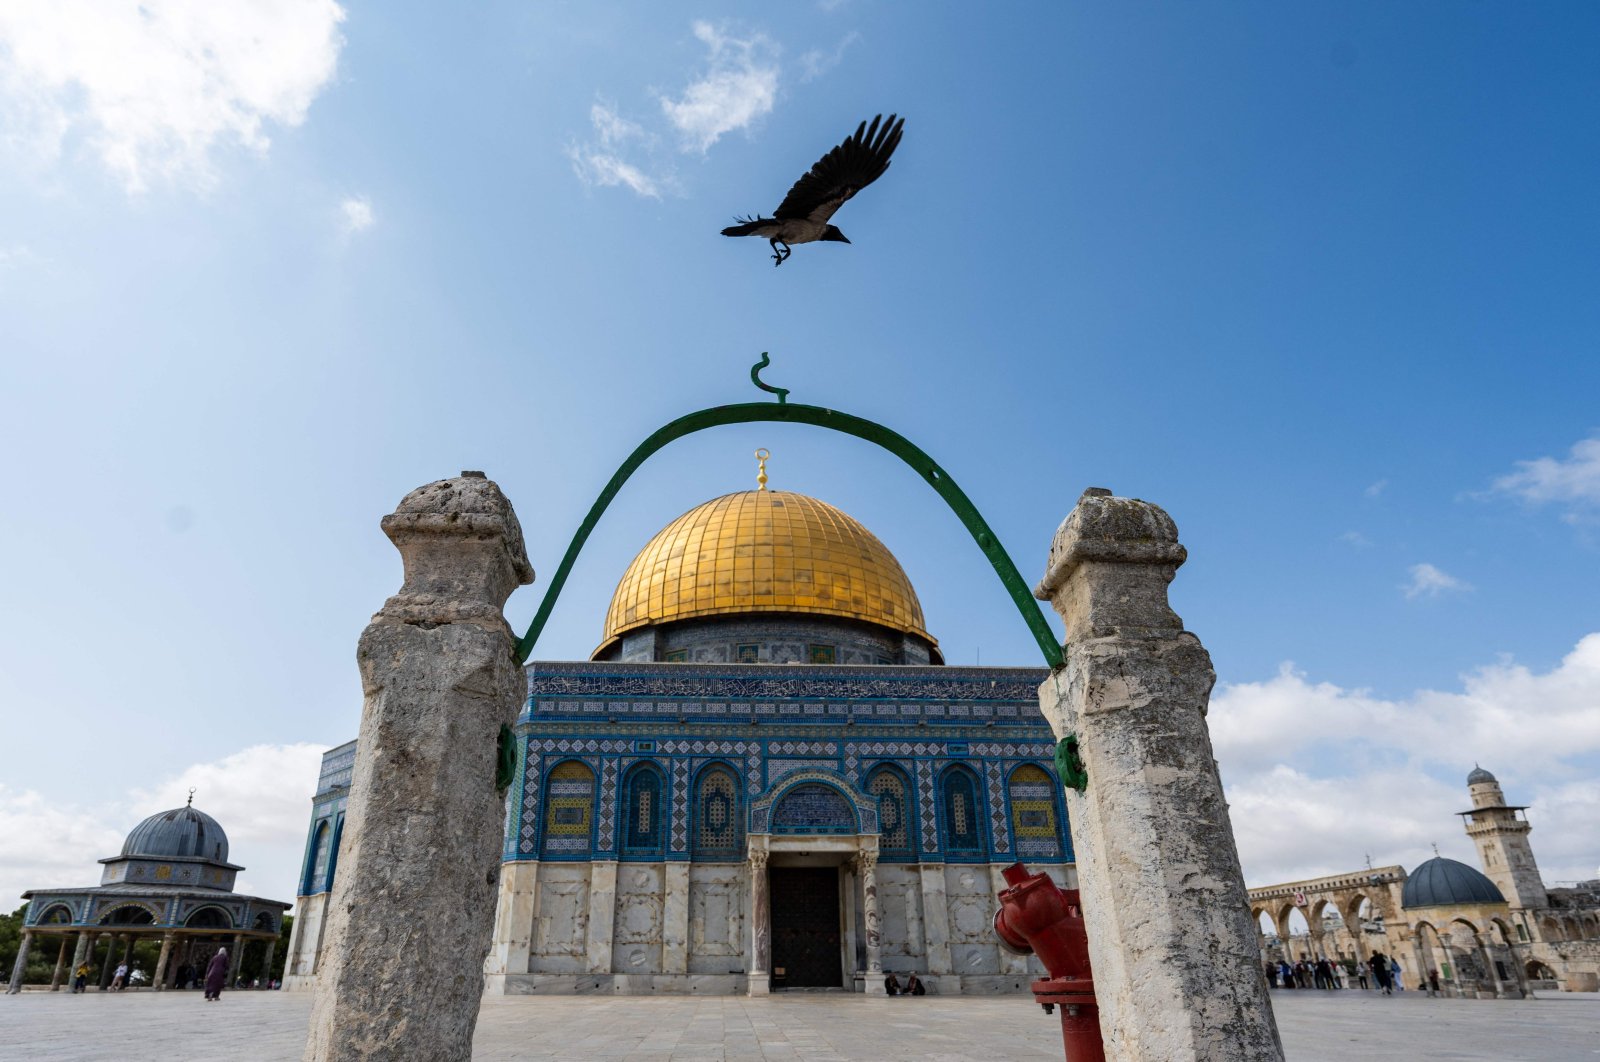 A crow flies near the Dome of the Rock mosque as tourists visit the Al-Aqsa Mosque compound in the occupied Jerusalem, Palestine, June 18, 2023. (AFP Photo)